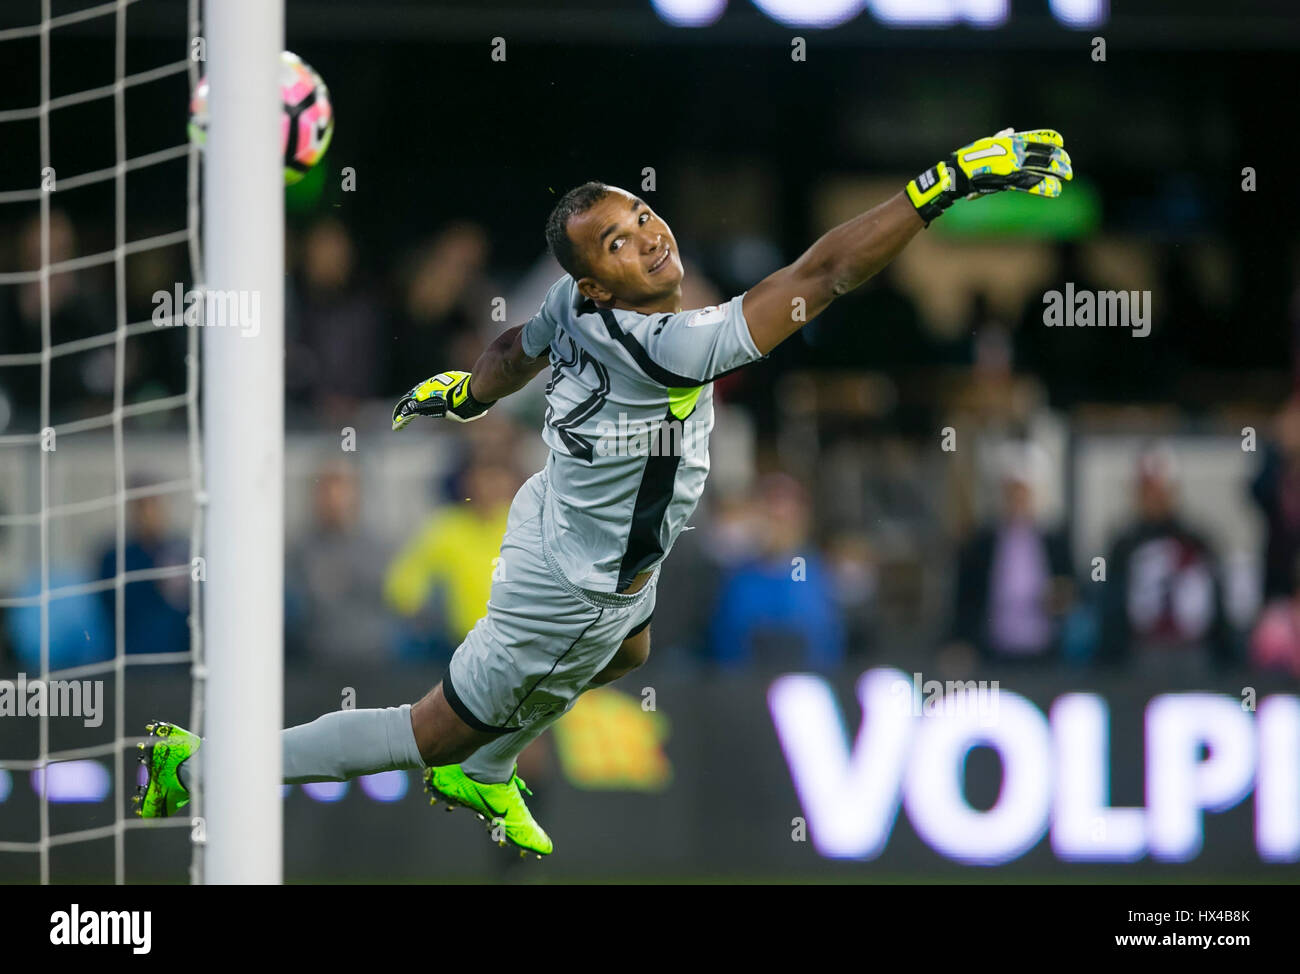 San Jose, CA. 24th Mar, 2017. Honduras National Team goal keeper Donis Escober (22) gives up a goal during the FIFA World Cup Qualifying game between the United States and Honduras at Avaya Stadium in San Jose, CA. The US defeated Honduras 6-0. Damon Tarver/Cal Sport Media/Alamy Live News Stock Photo